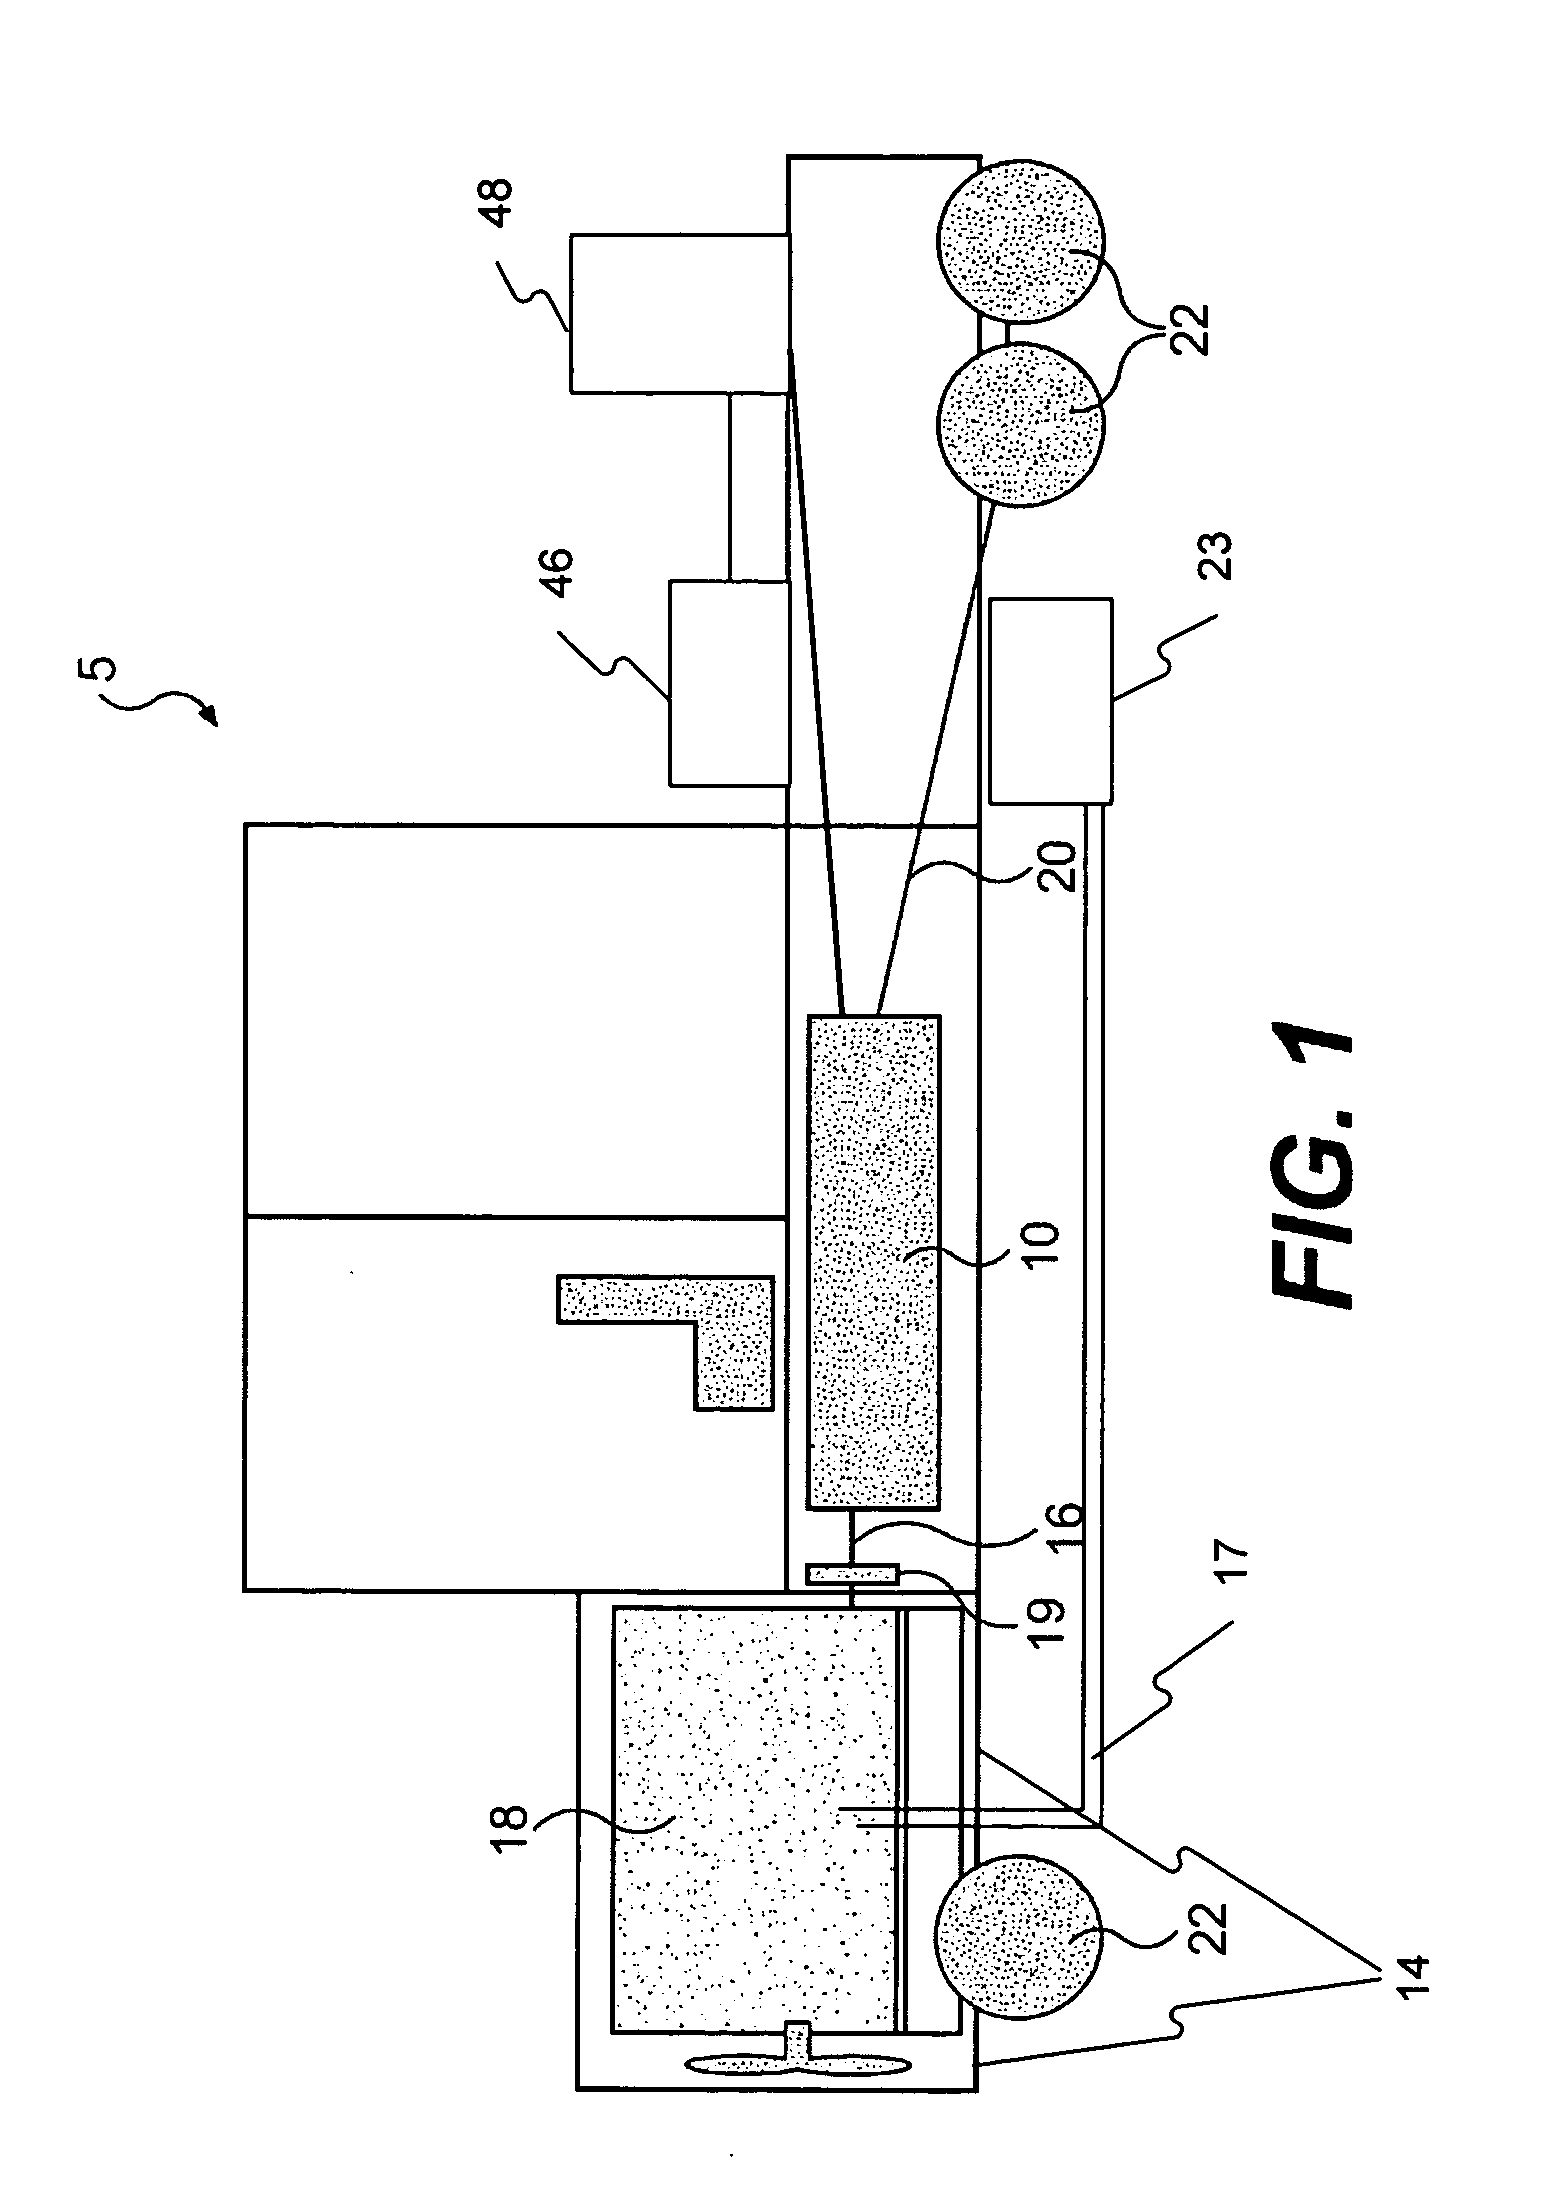 Method and system for reducing pollutant emissions of a power system